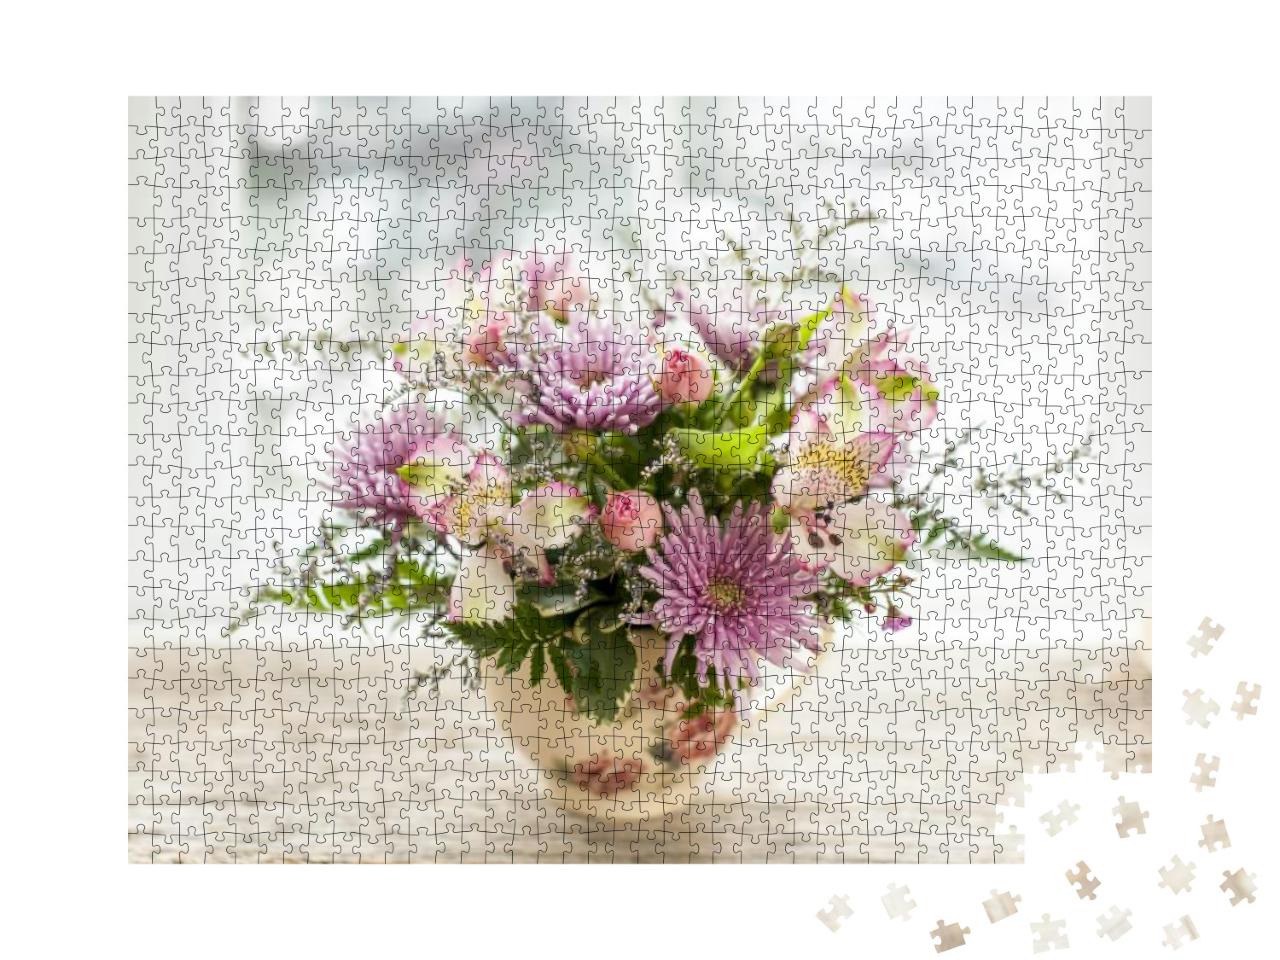 Bouquet of Colorful Flowers Arranged in Small Vase... Jigsaw Puzzle with 1000 pieces